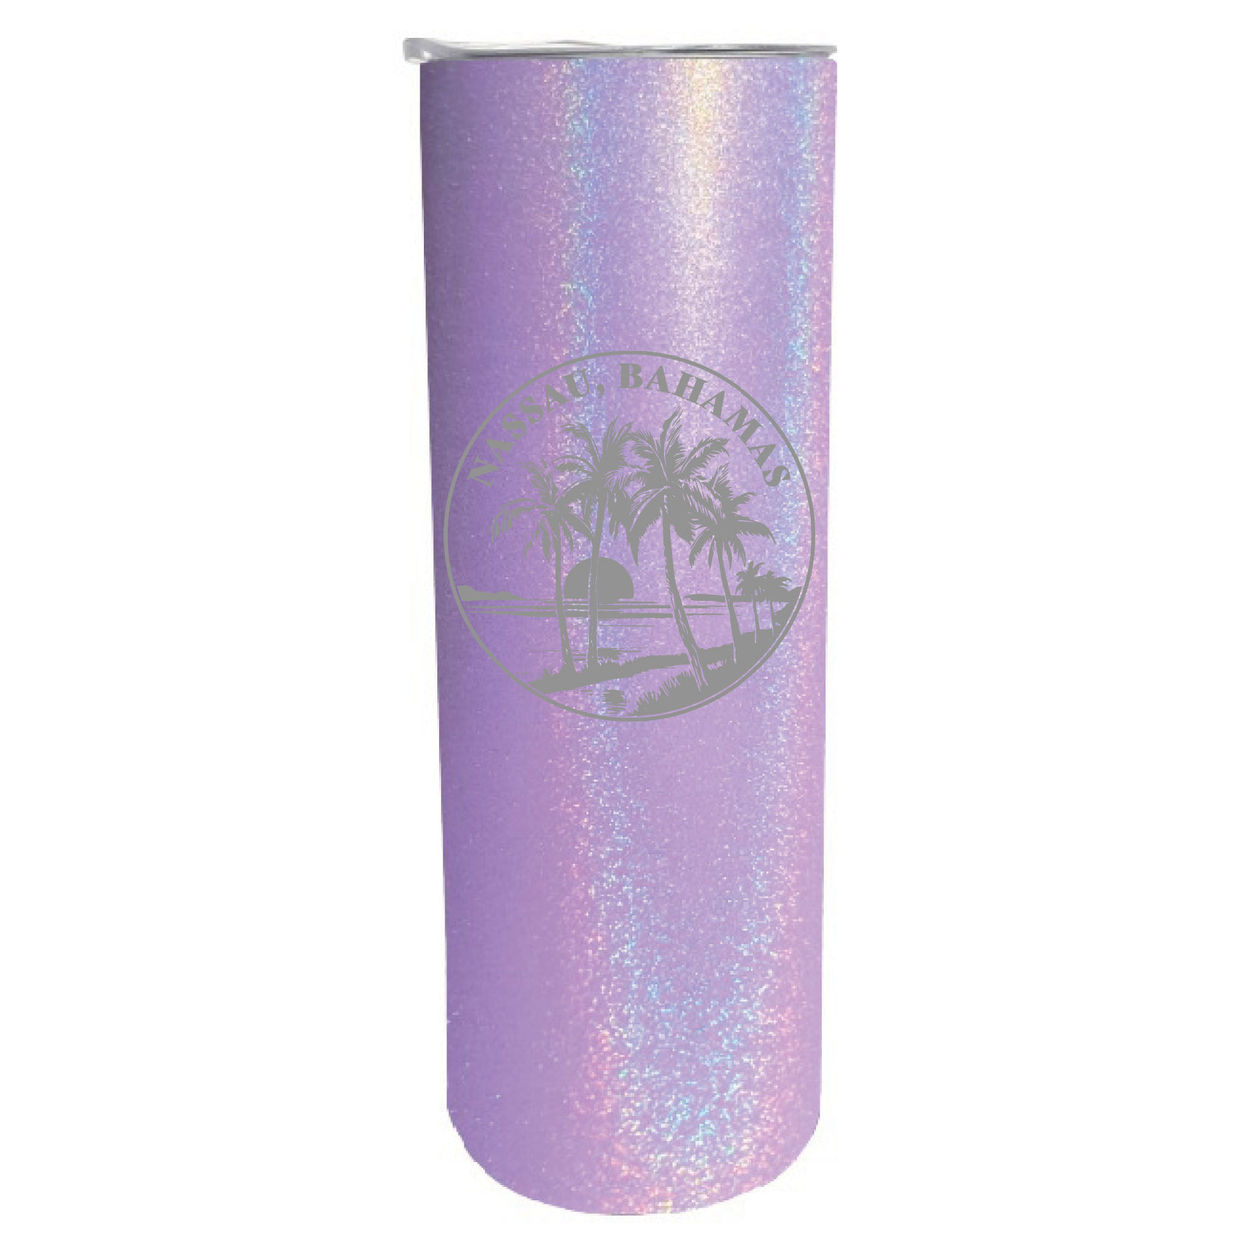 Nassau The Bahamas Souvenir 20 Oz Engraved Insulated Stainless Steel Skinny Tumbler - Seafoam,,2-Pack